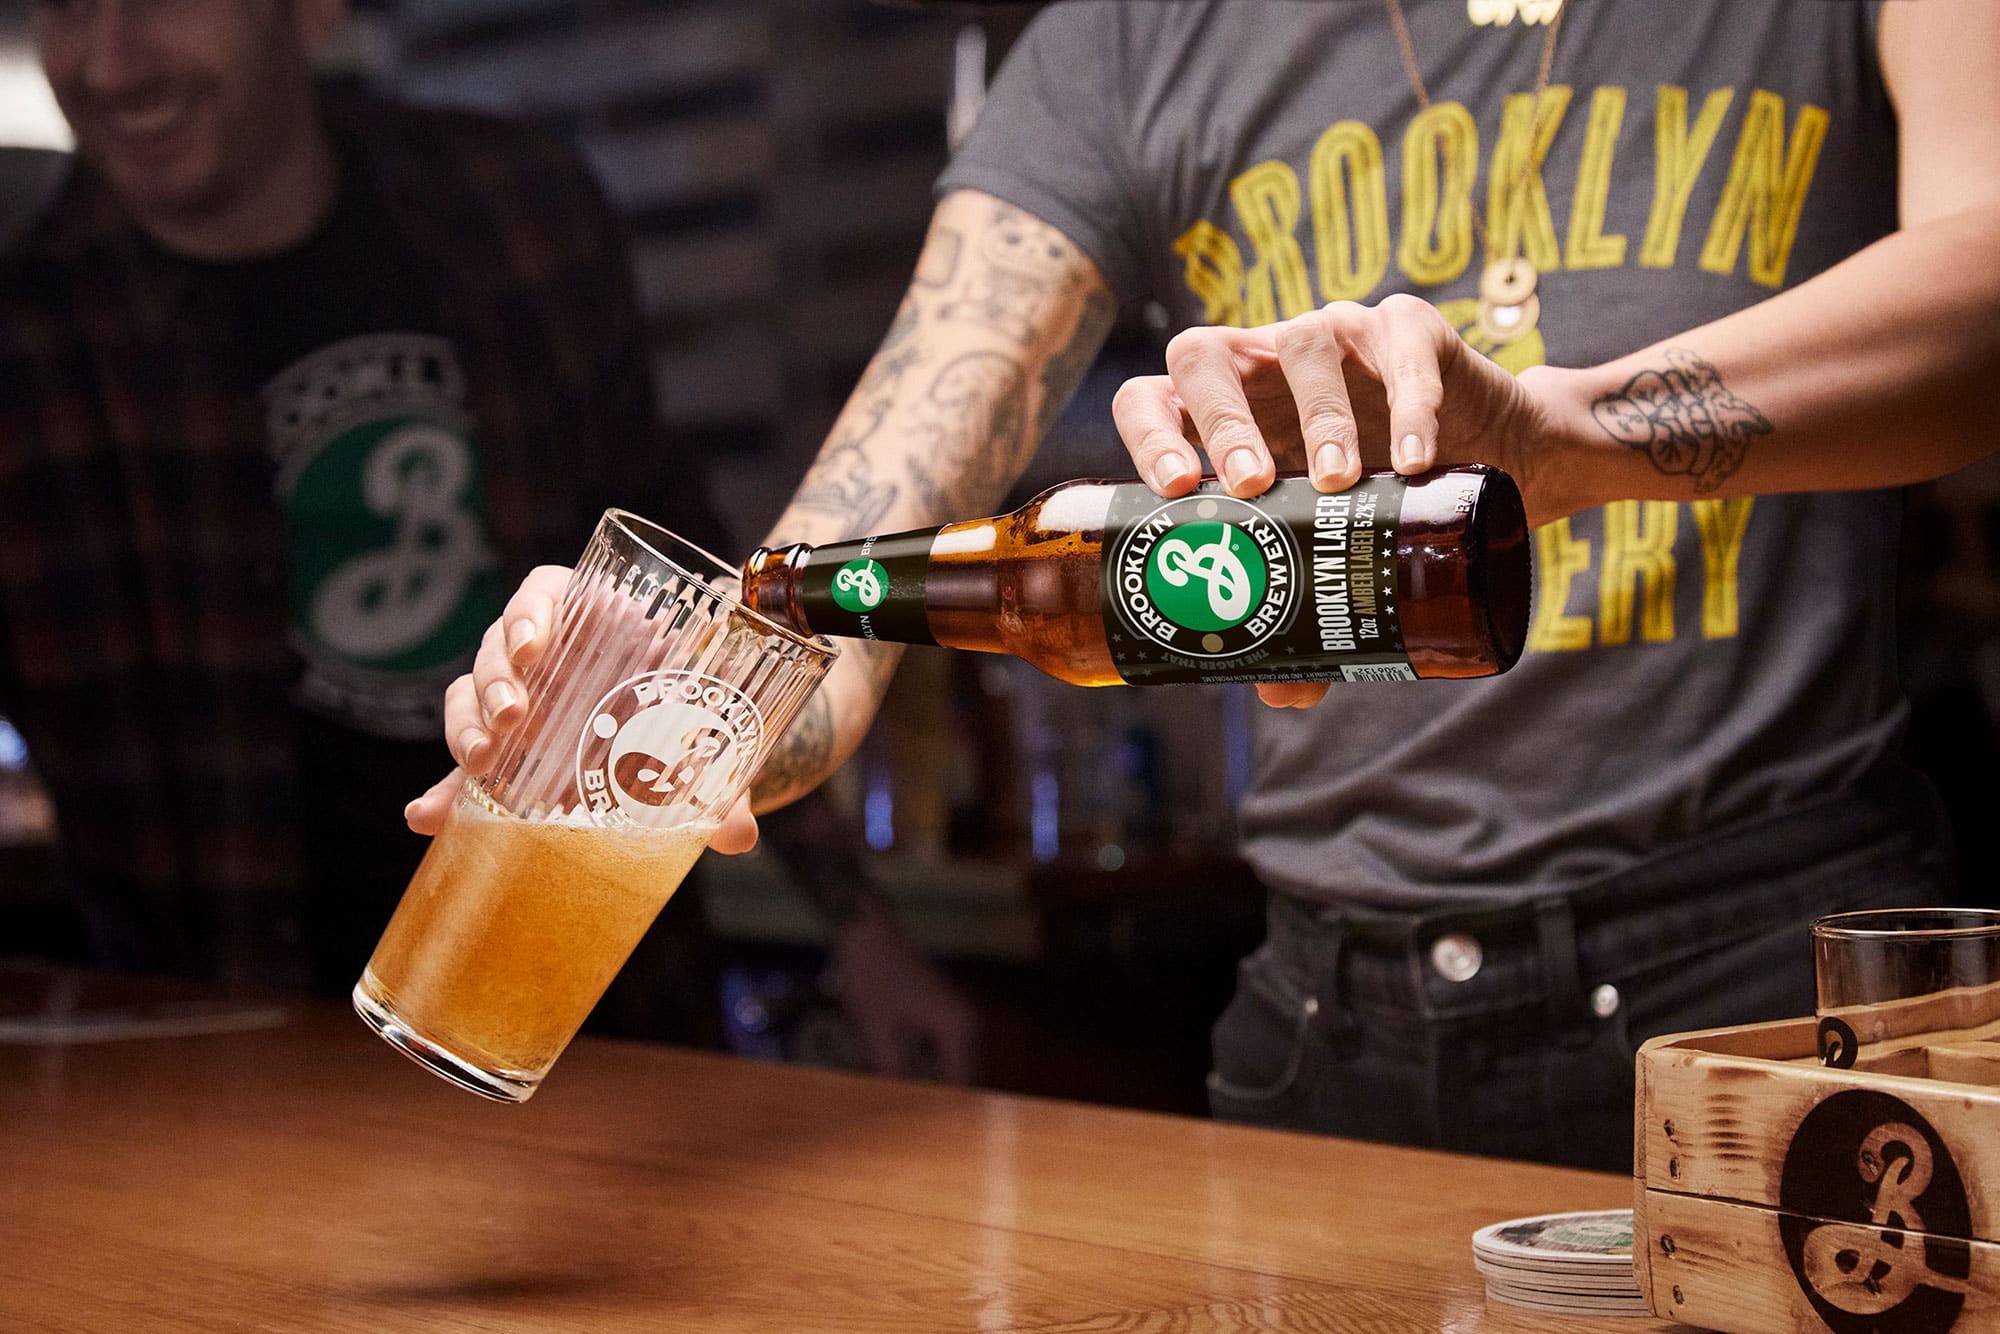 https://brooklynbrewery.com/wp-content/uploads/2019/08/BrooklynBrewery_Bar_Products_592_US_Lager.jpg